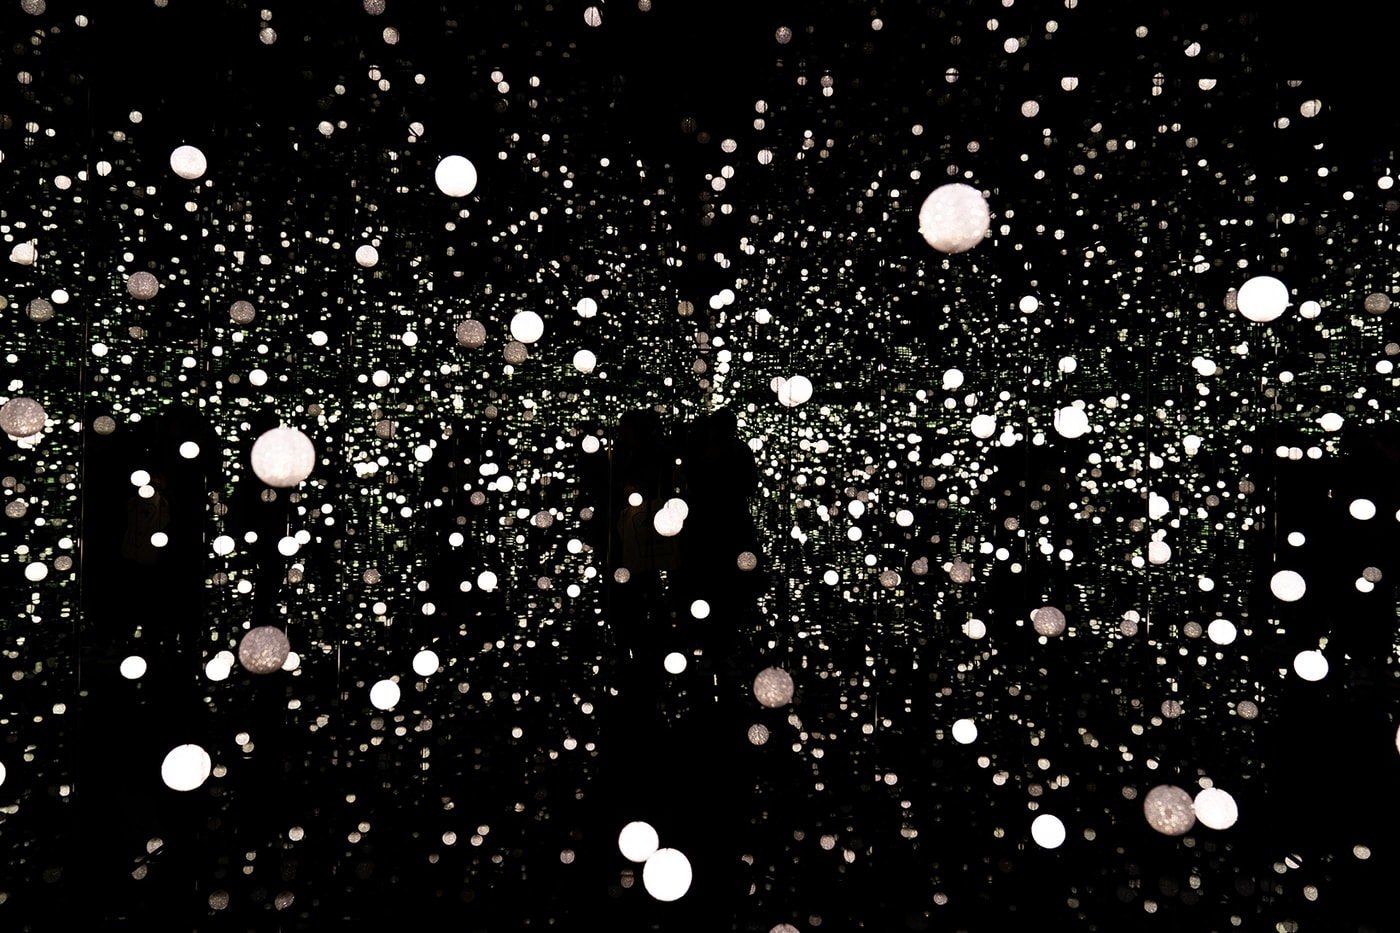 Yayoi Kusama "EVERY DAY I PRAY FOR LOVE" 'DANCING LIGHTS THAT FLEW UP TO THE UNIVERSE'